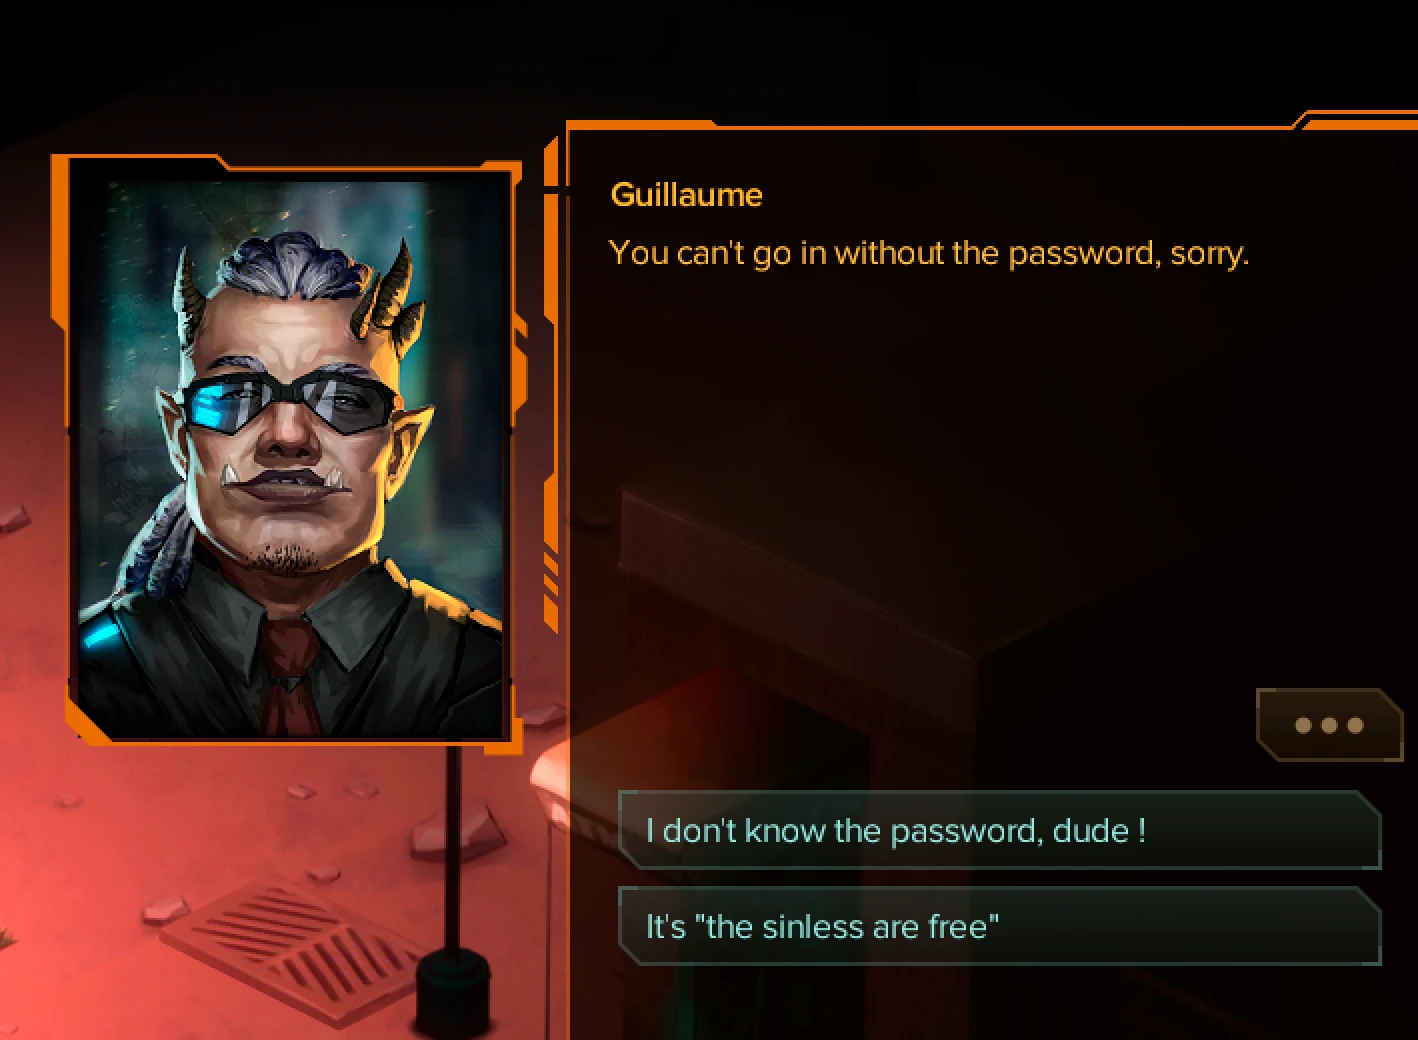 Screenshot of the final dialog in game with the minimum "non disappearing" choices